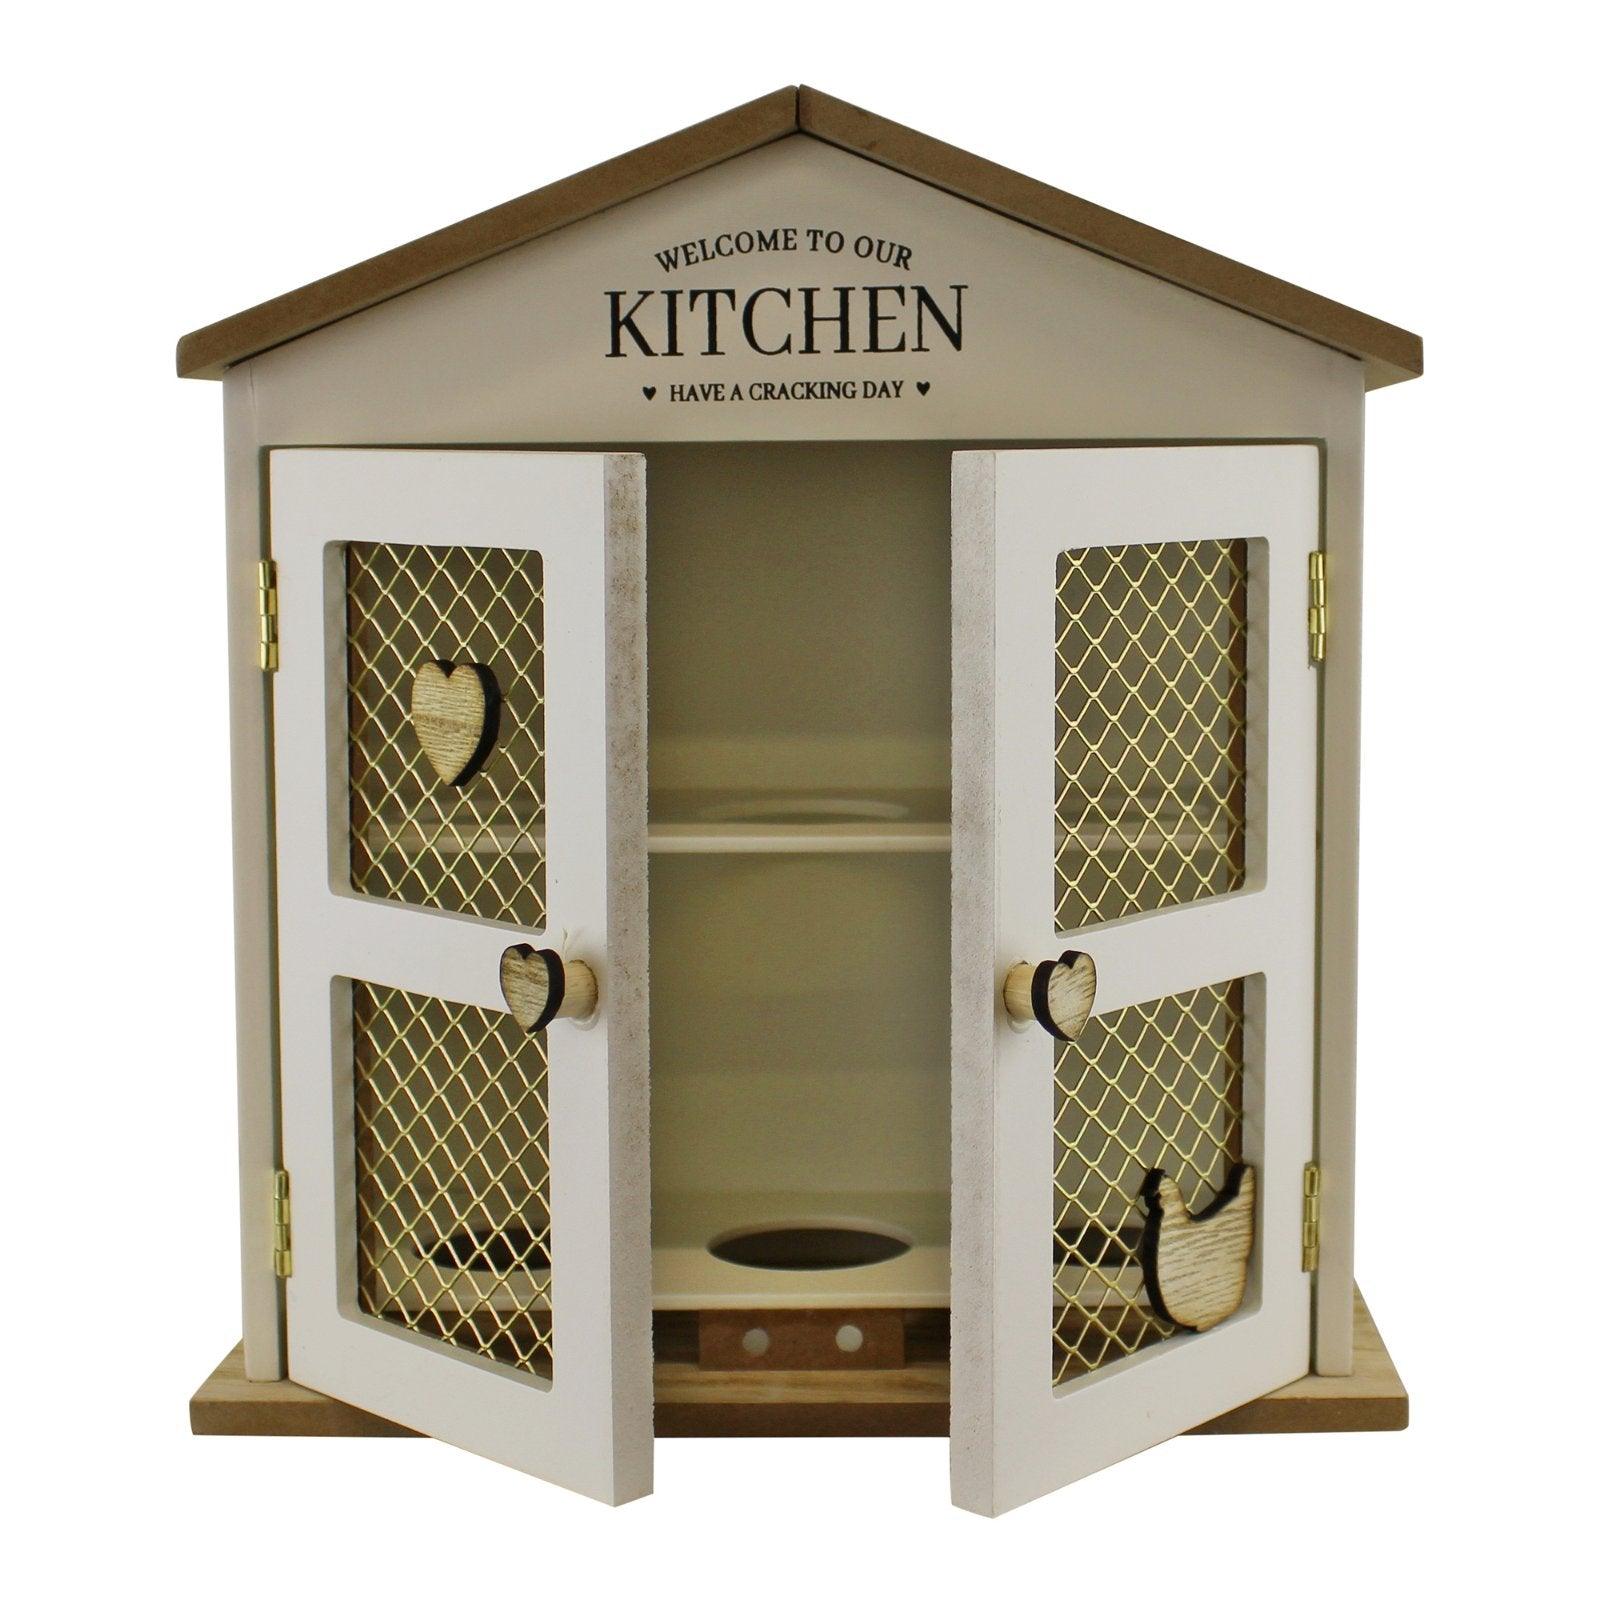 View Welcome To Our Kitchen Egg House Storage information